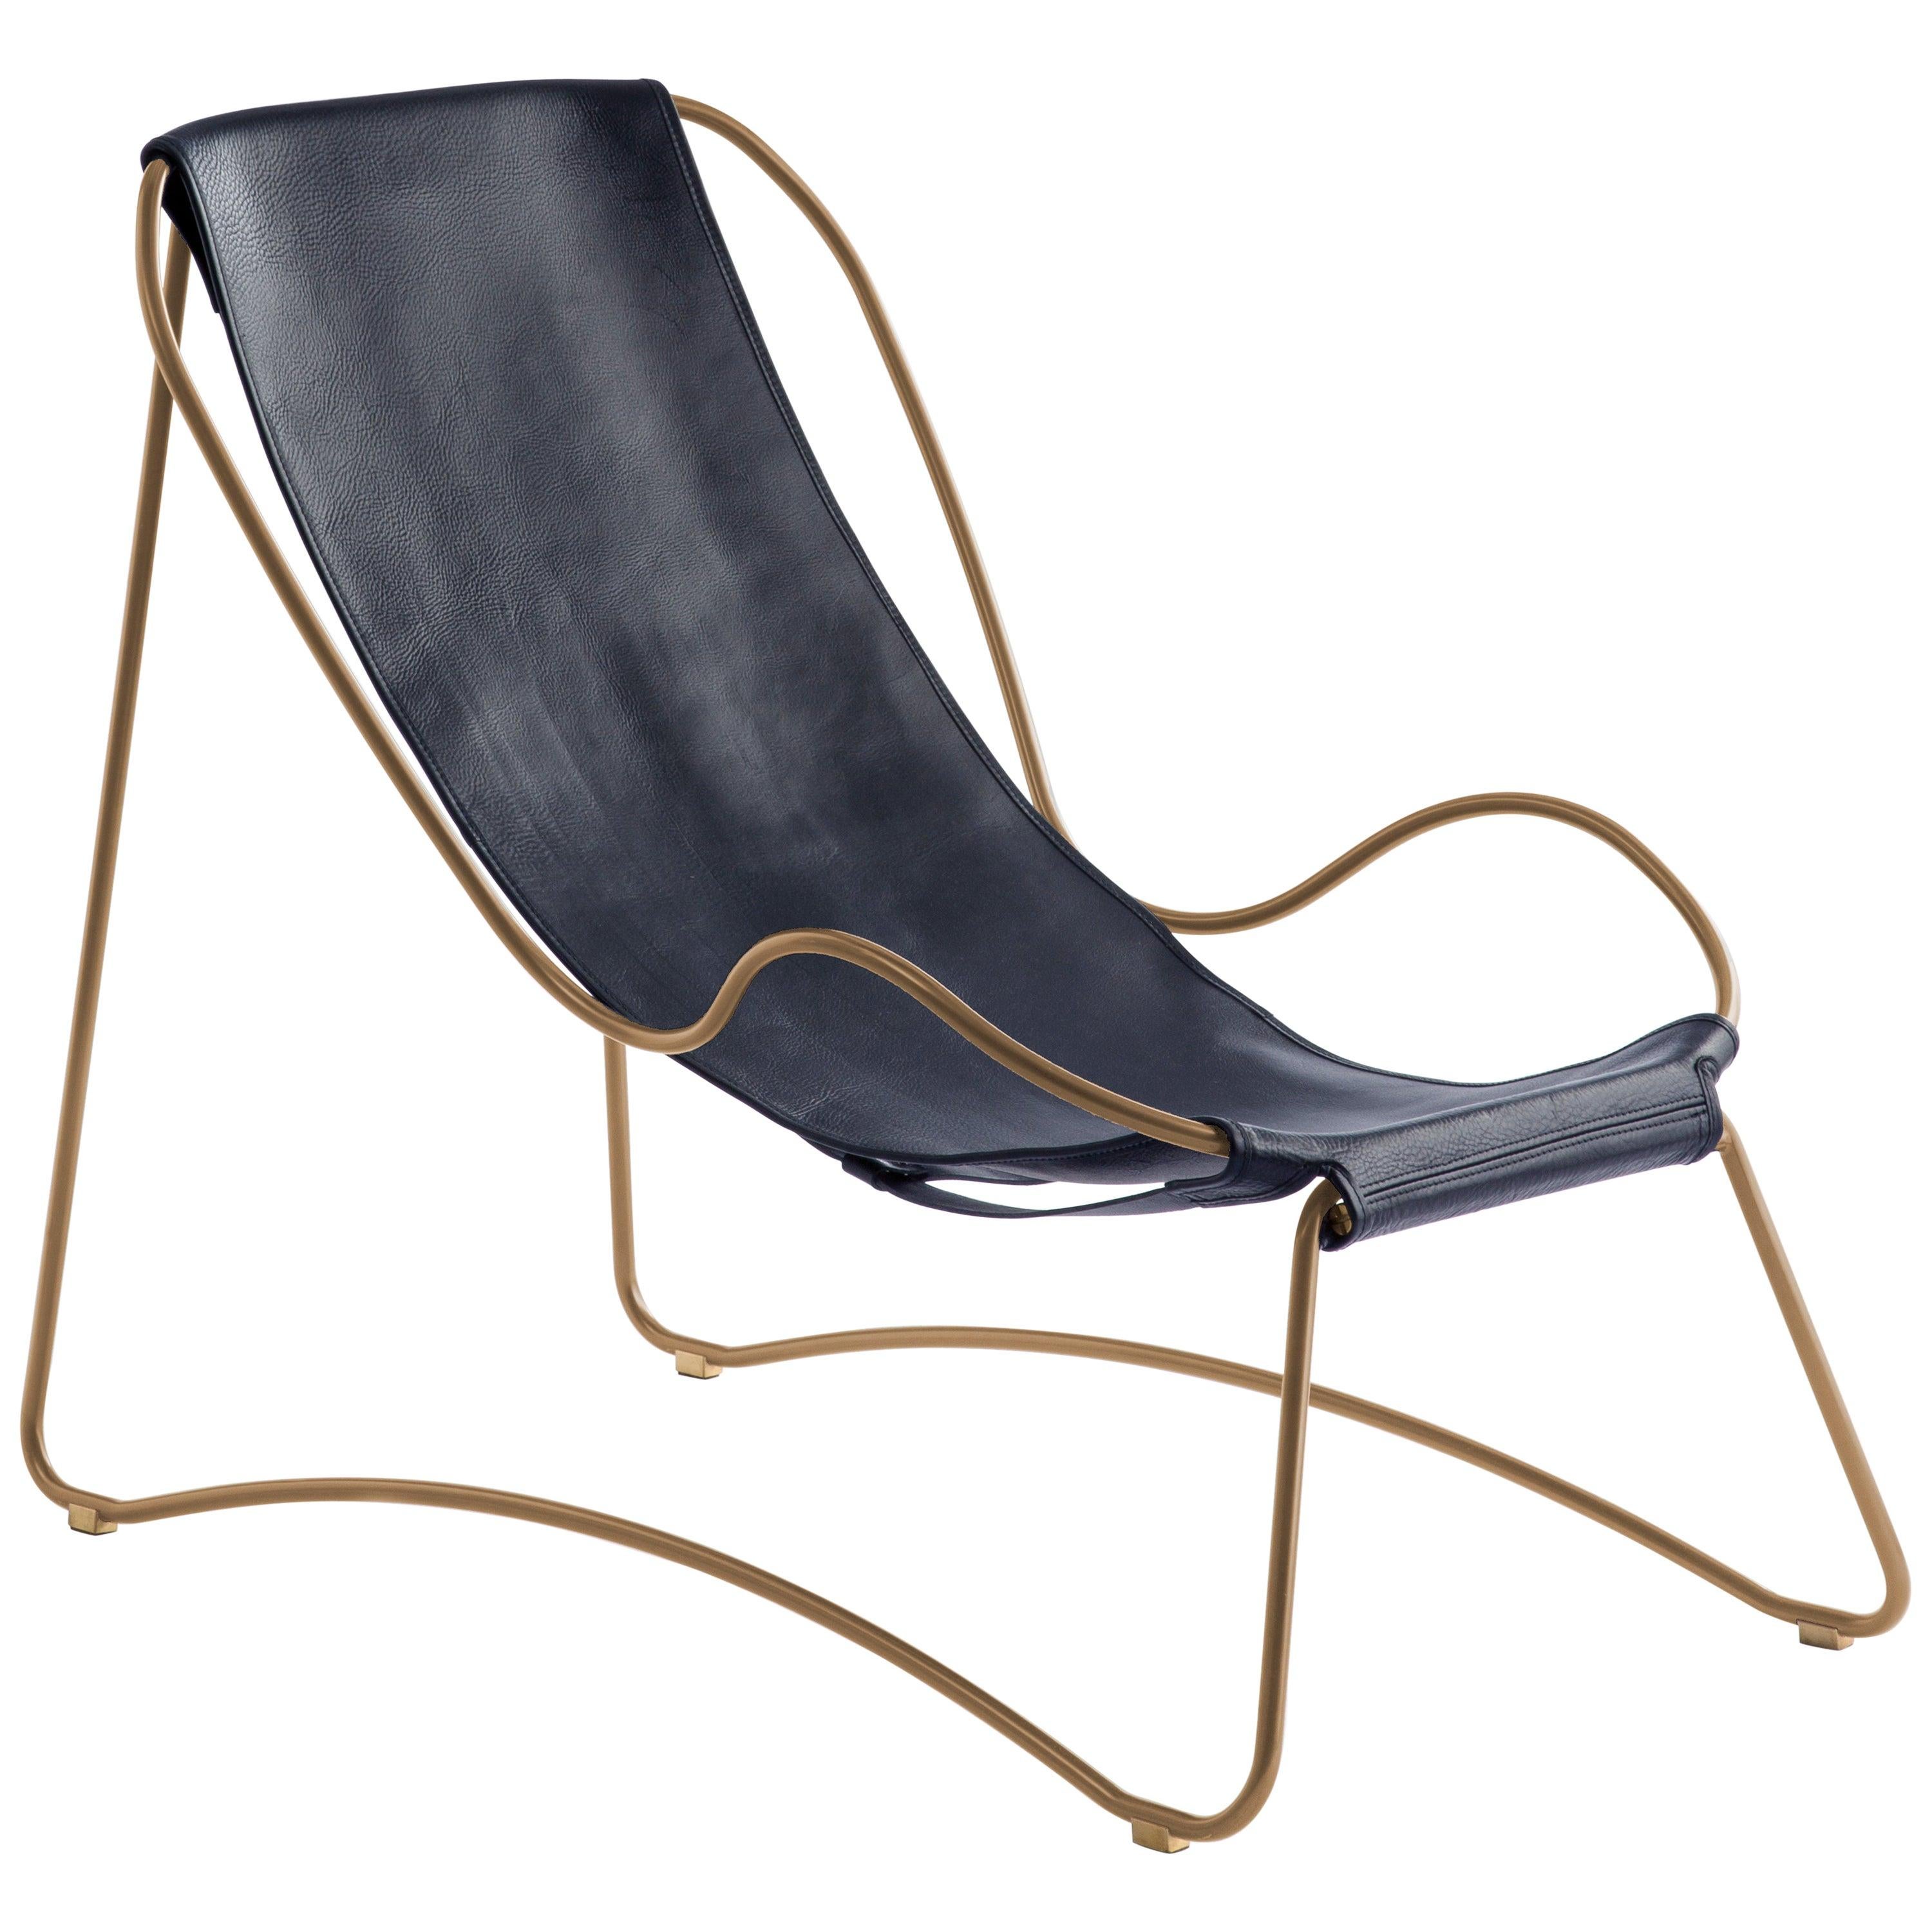 Skulpturale Contemporary Chaise Lounge Metall in Altmessing, Leder in Marineblau Muster im Angebot